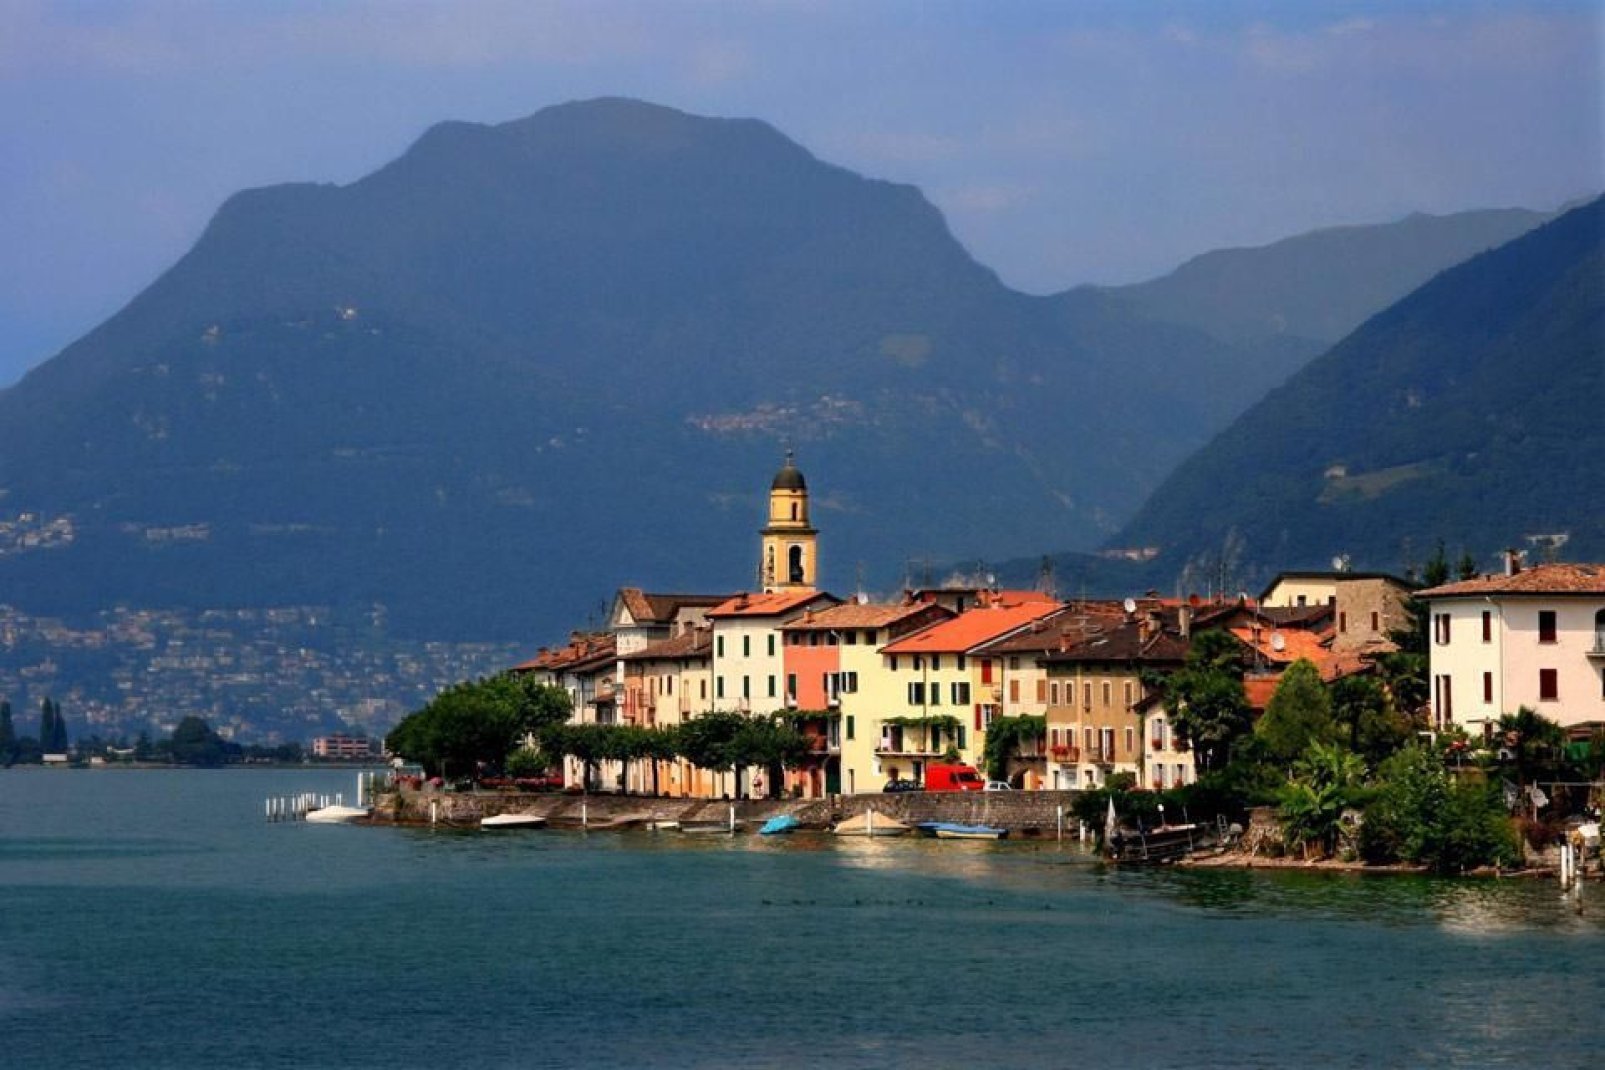 With its brightly coloured houses, Lugano boasts hints of Italy. In fact, the official language in this canton is Italian!